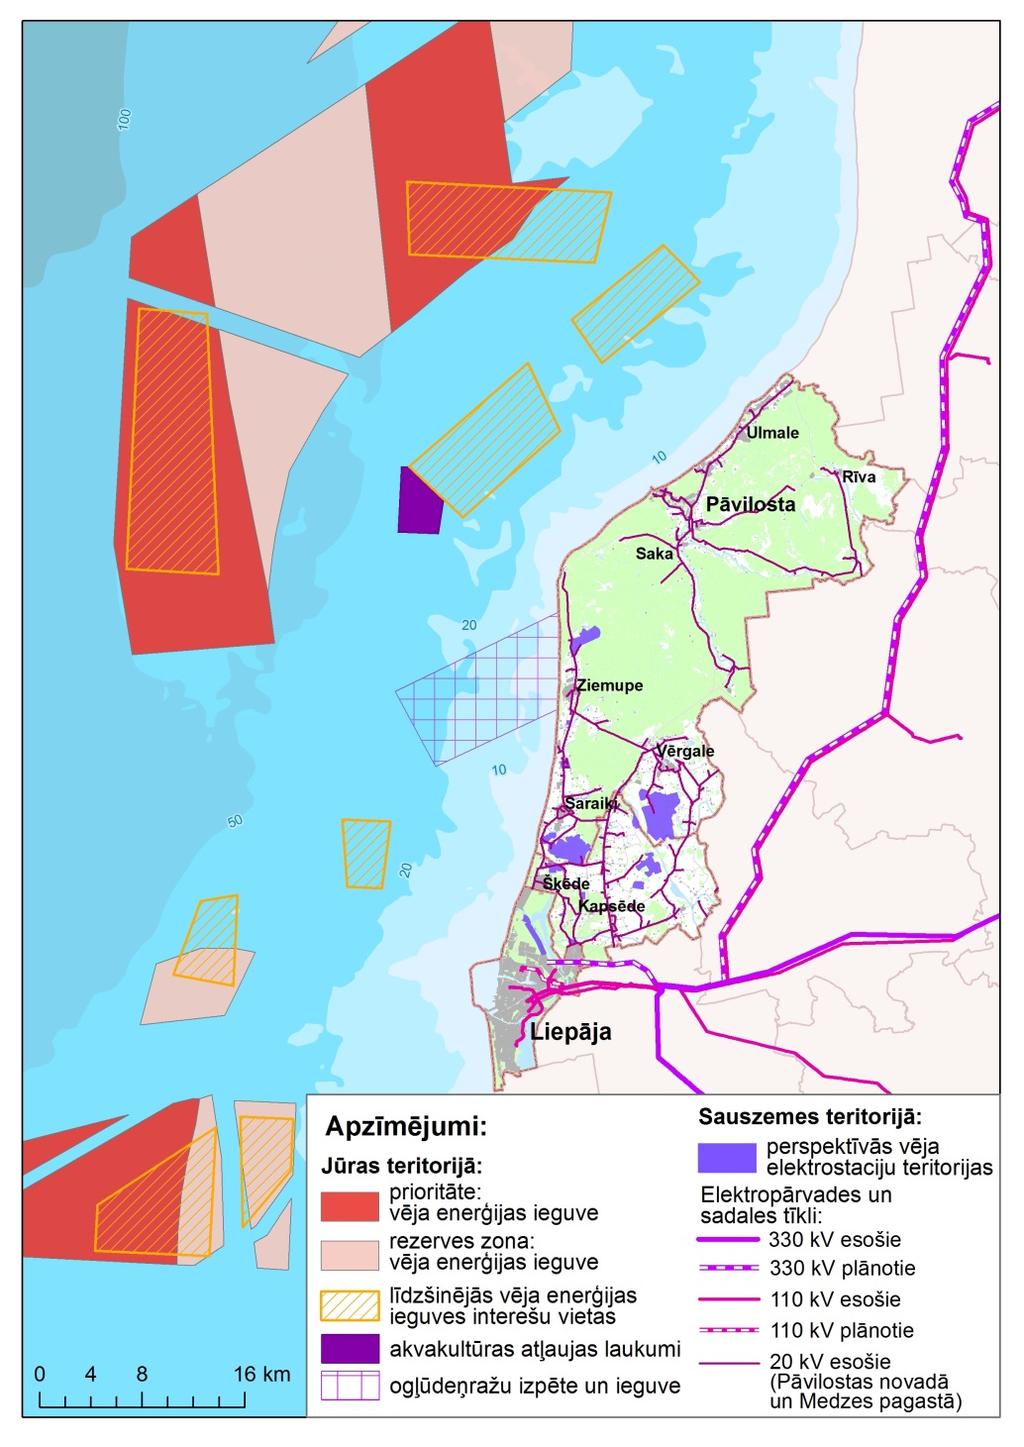 Potential interests and sea uses (wind parks, oil extraction,